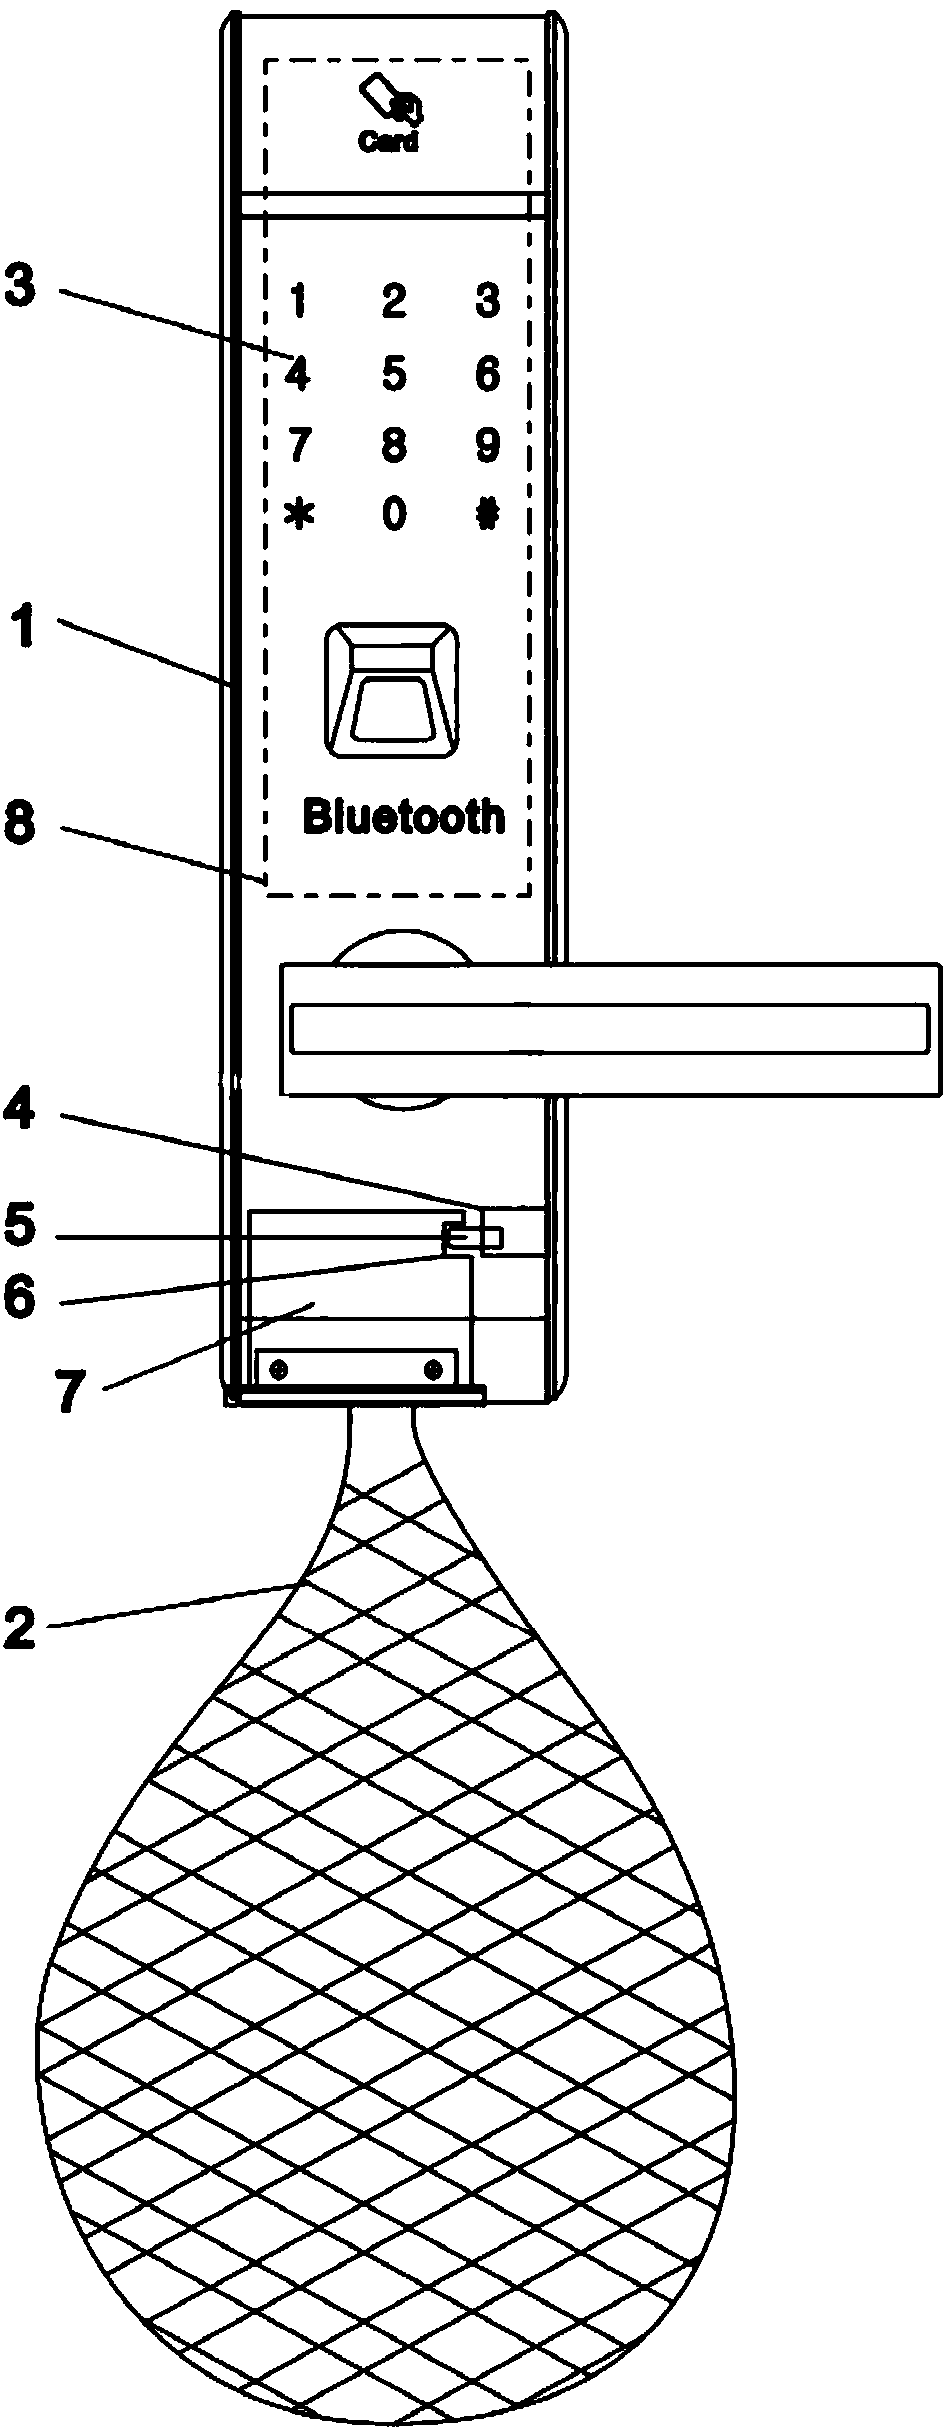 Intelligent lock provided with carriage bag